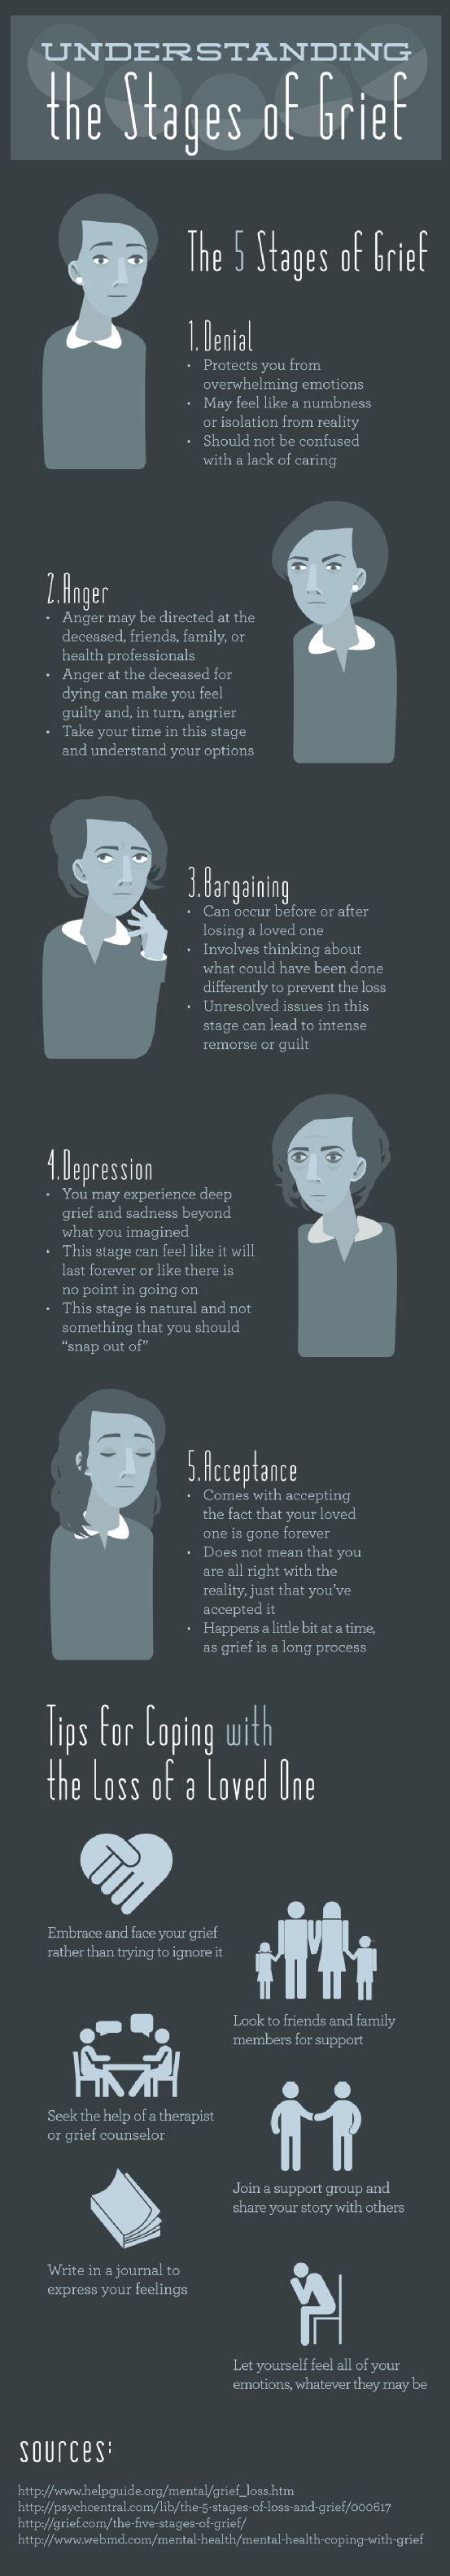 Psychology-Infographic-Understanding-The-Stages-Of-Grief-Infographic Psychology Infographic : Understanding The Stages Of Grief [Infographic]